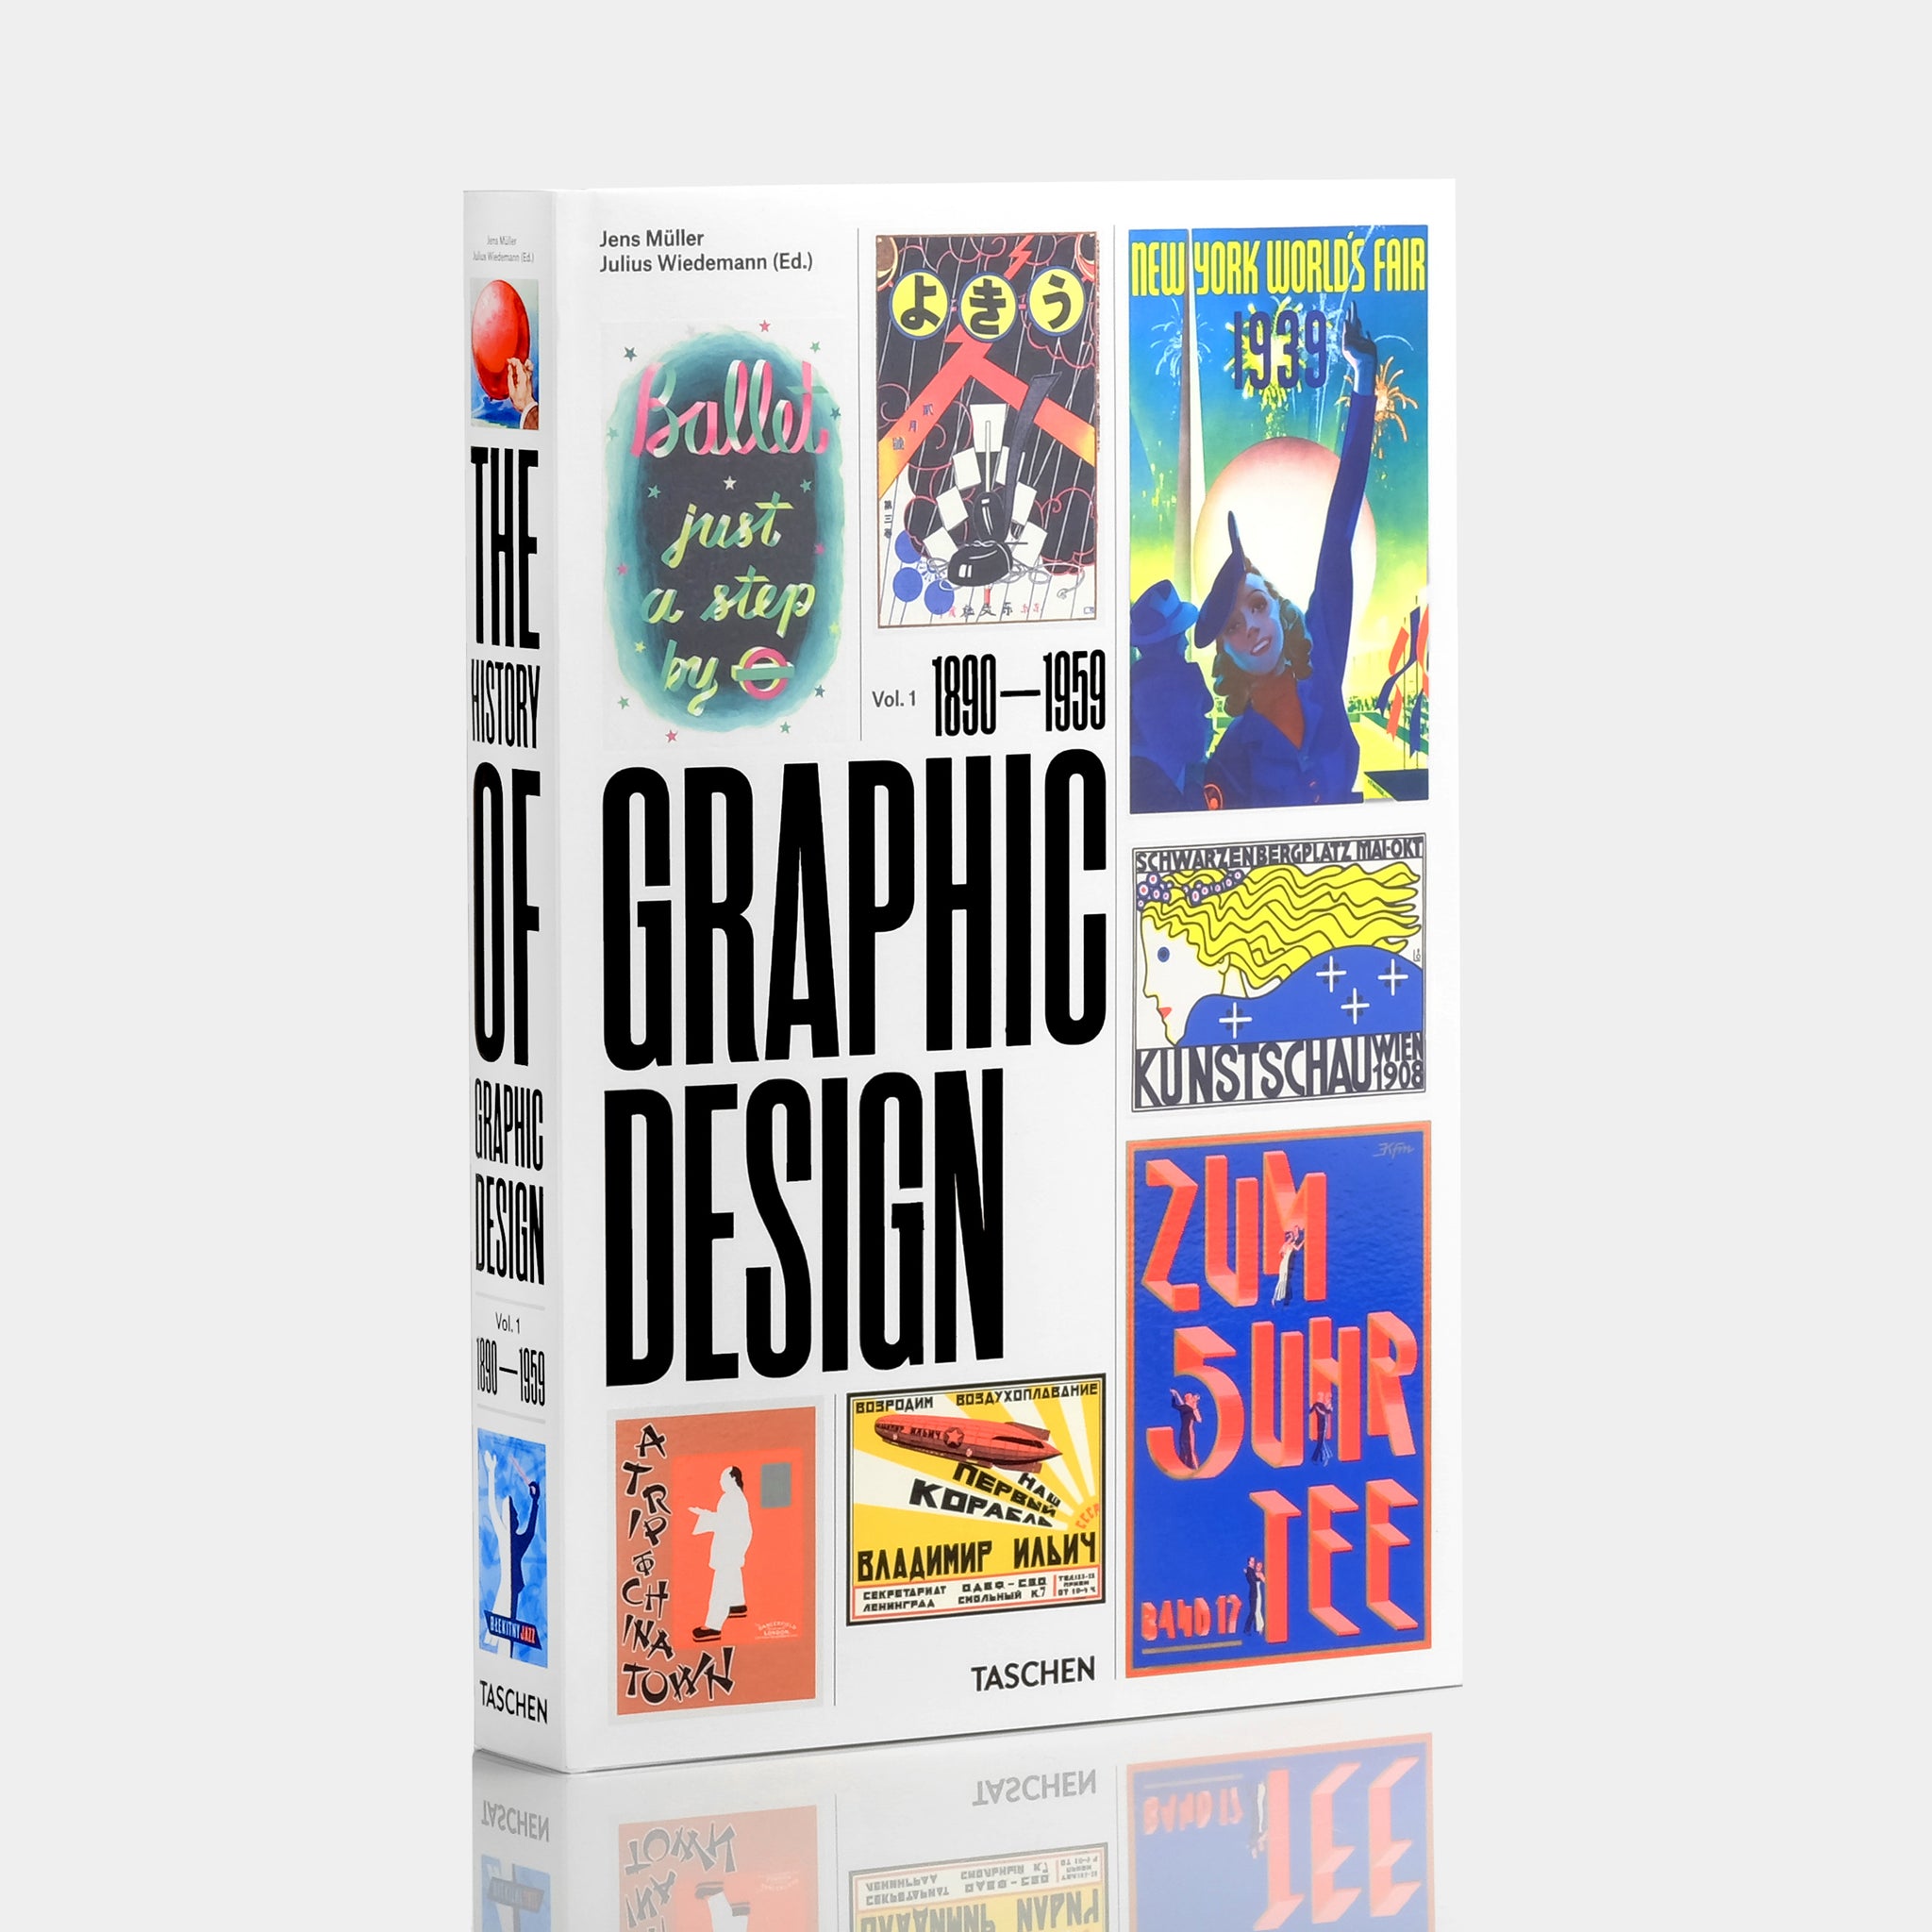 The History of Graphic Design: Vol. 1. (1890–1959) by Jens Müller XL T